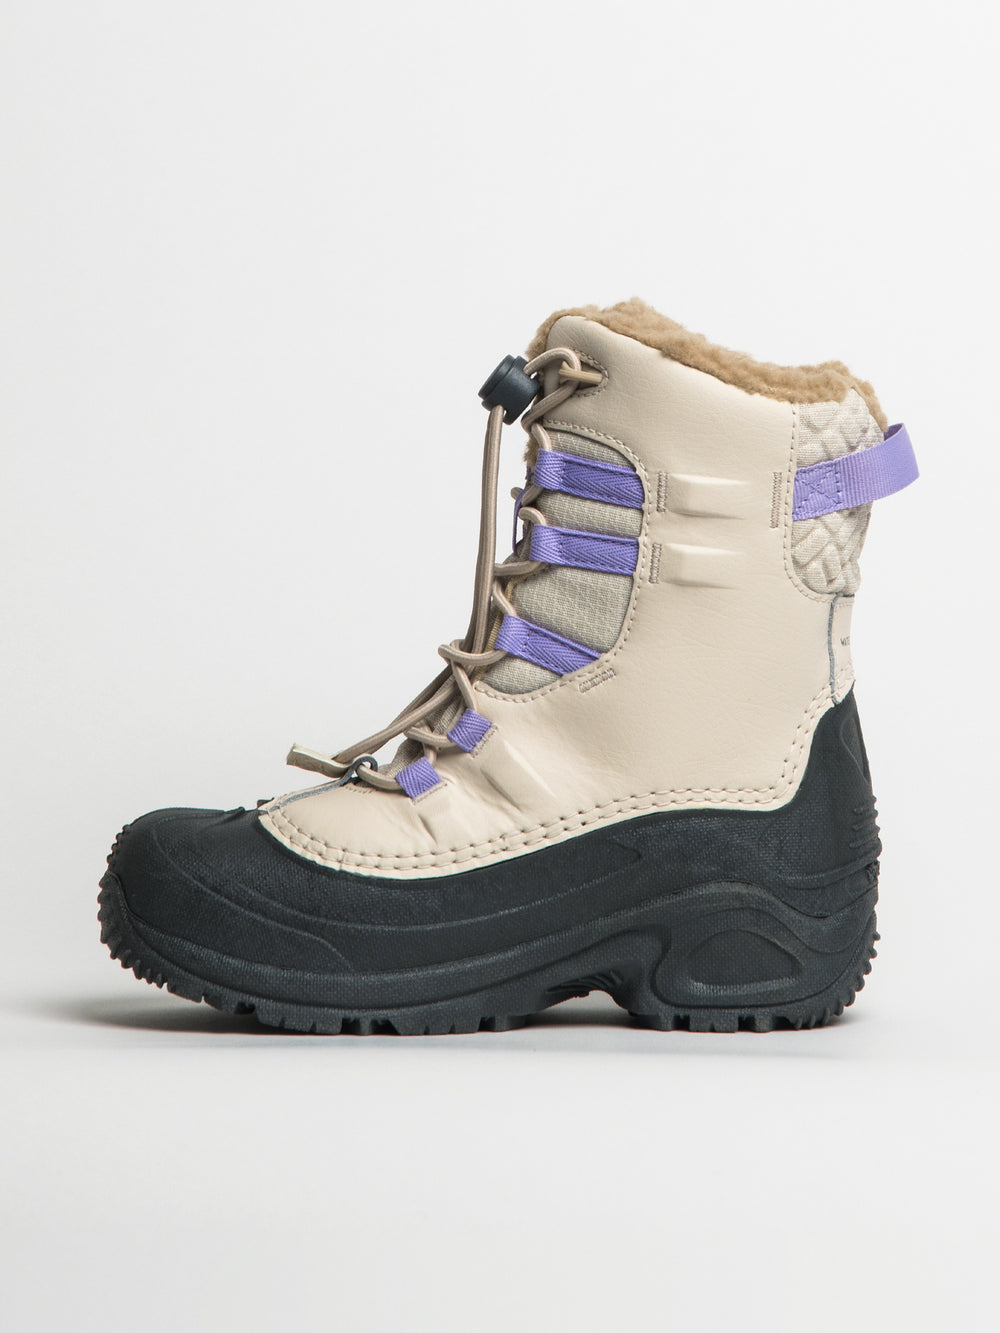 KIDS COLUMBIA YOUTH BUGABOOT CELSIUS BOOT